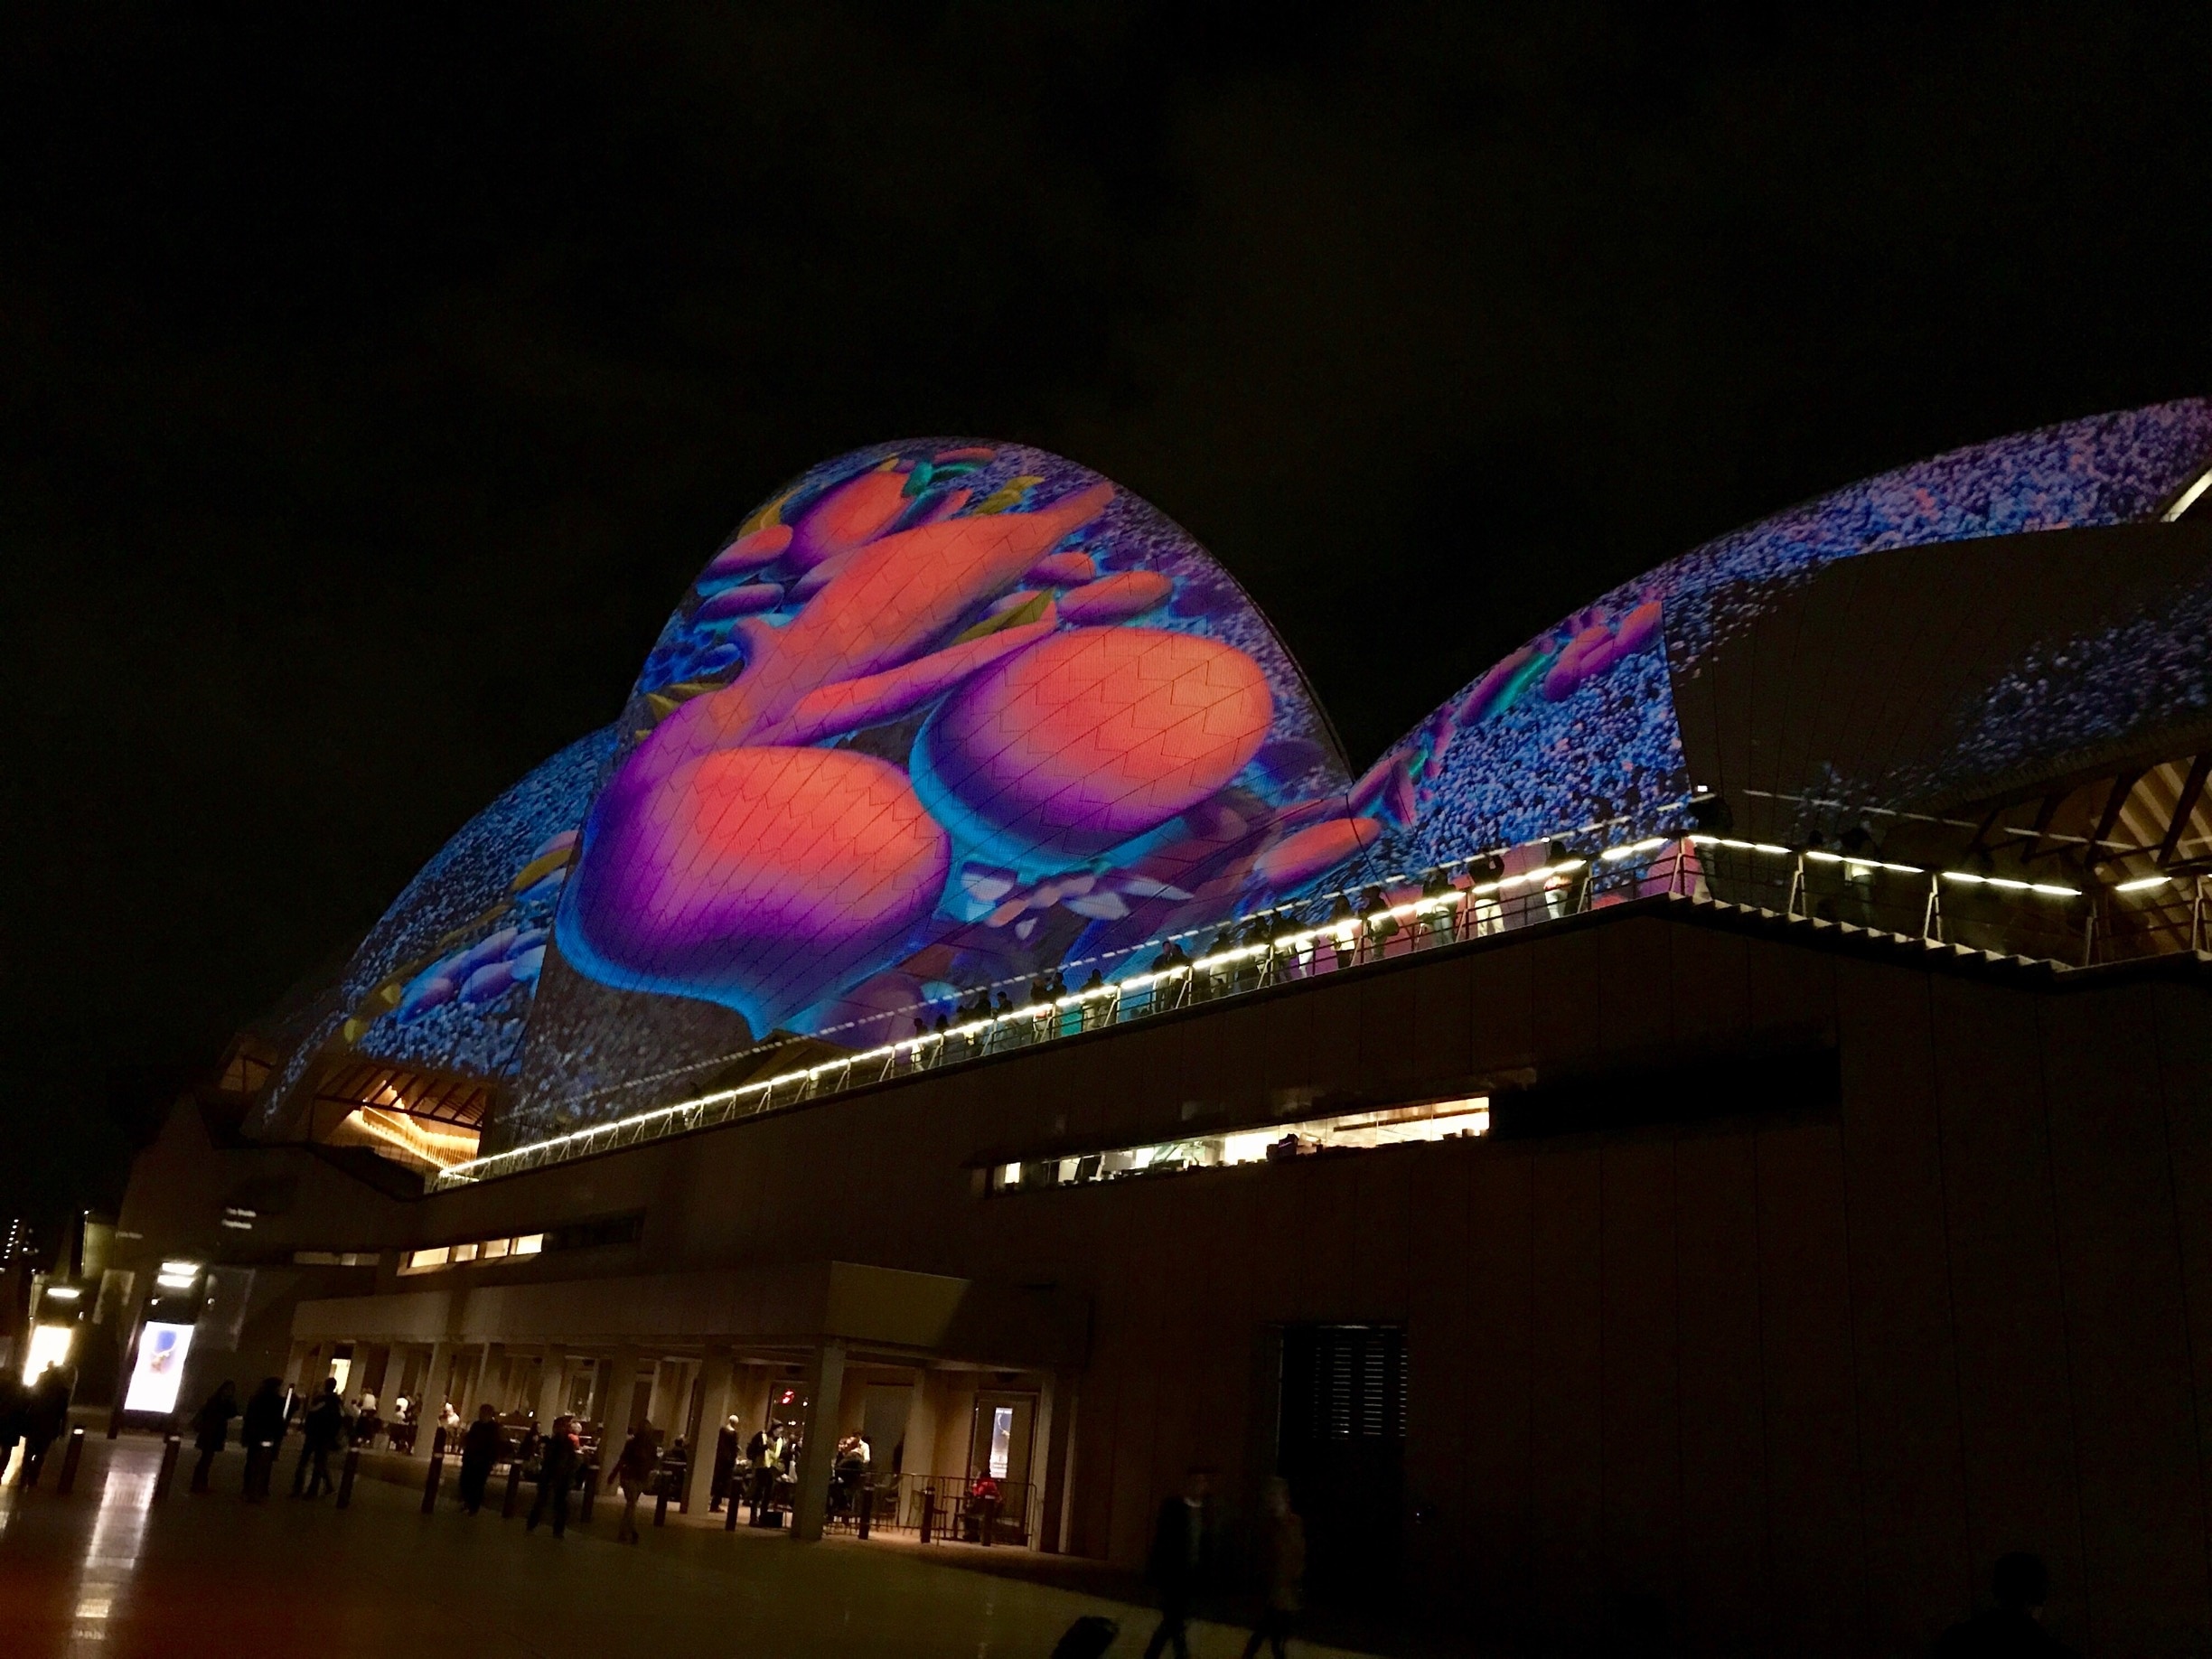 Vivid Sydney was way more awesome than I thought it would be! So amazing and spread out over the city! Highly recommend checking it out and/or planning your trip around it if your able to or looking to go around June